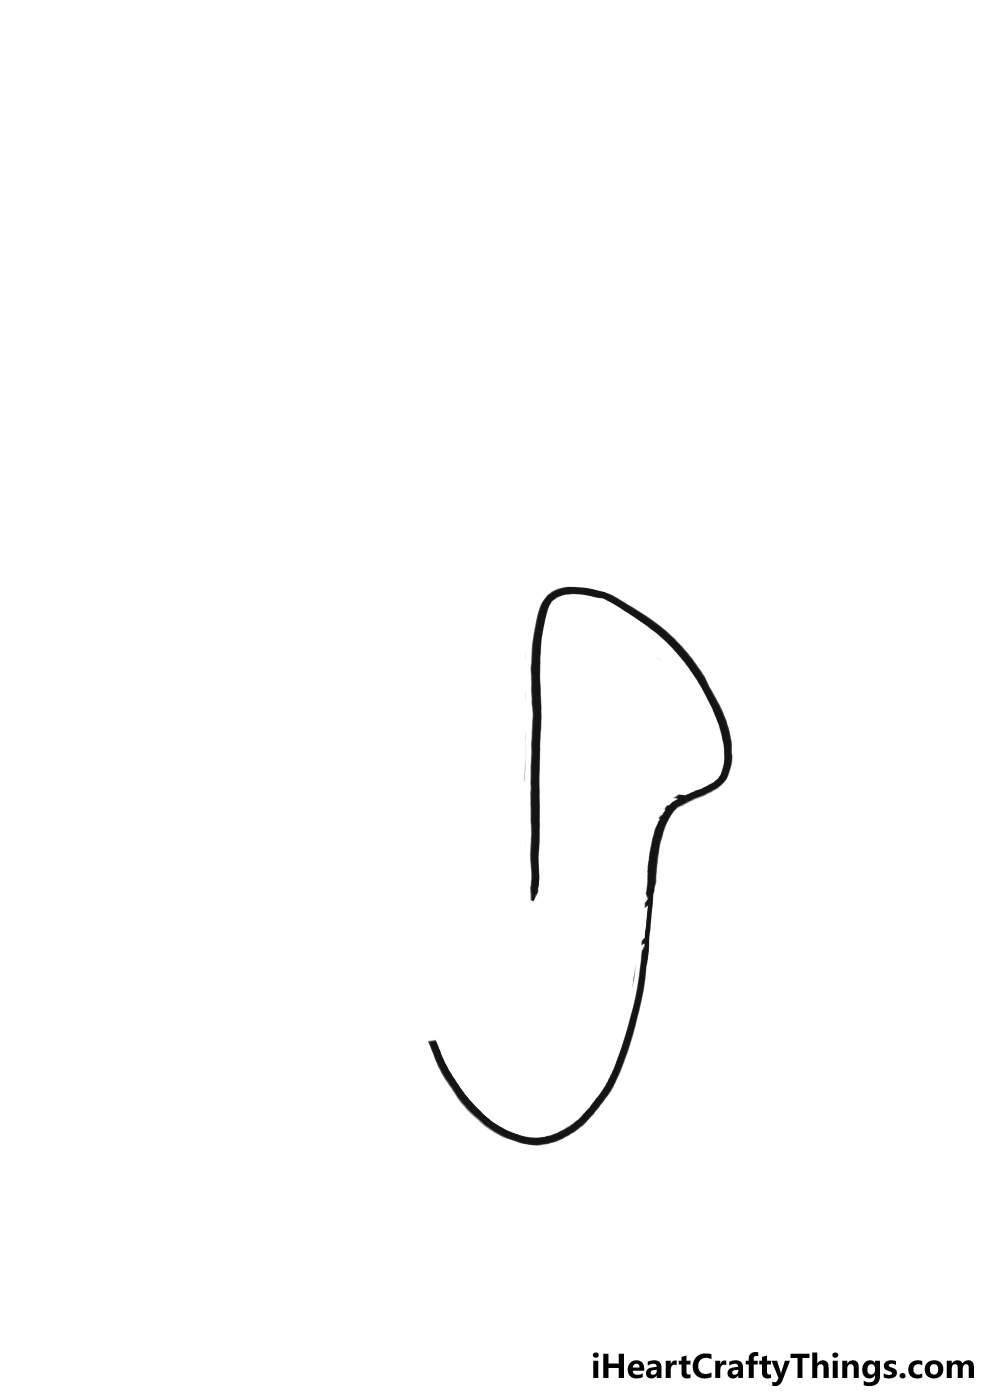 How to Draw A Saxophone step 1